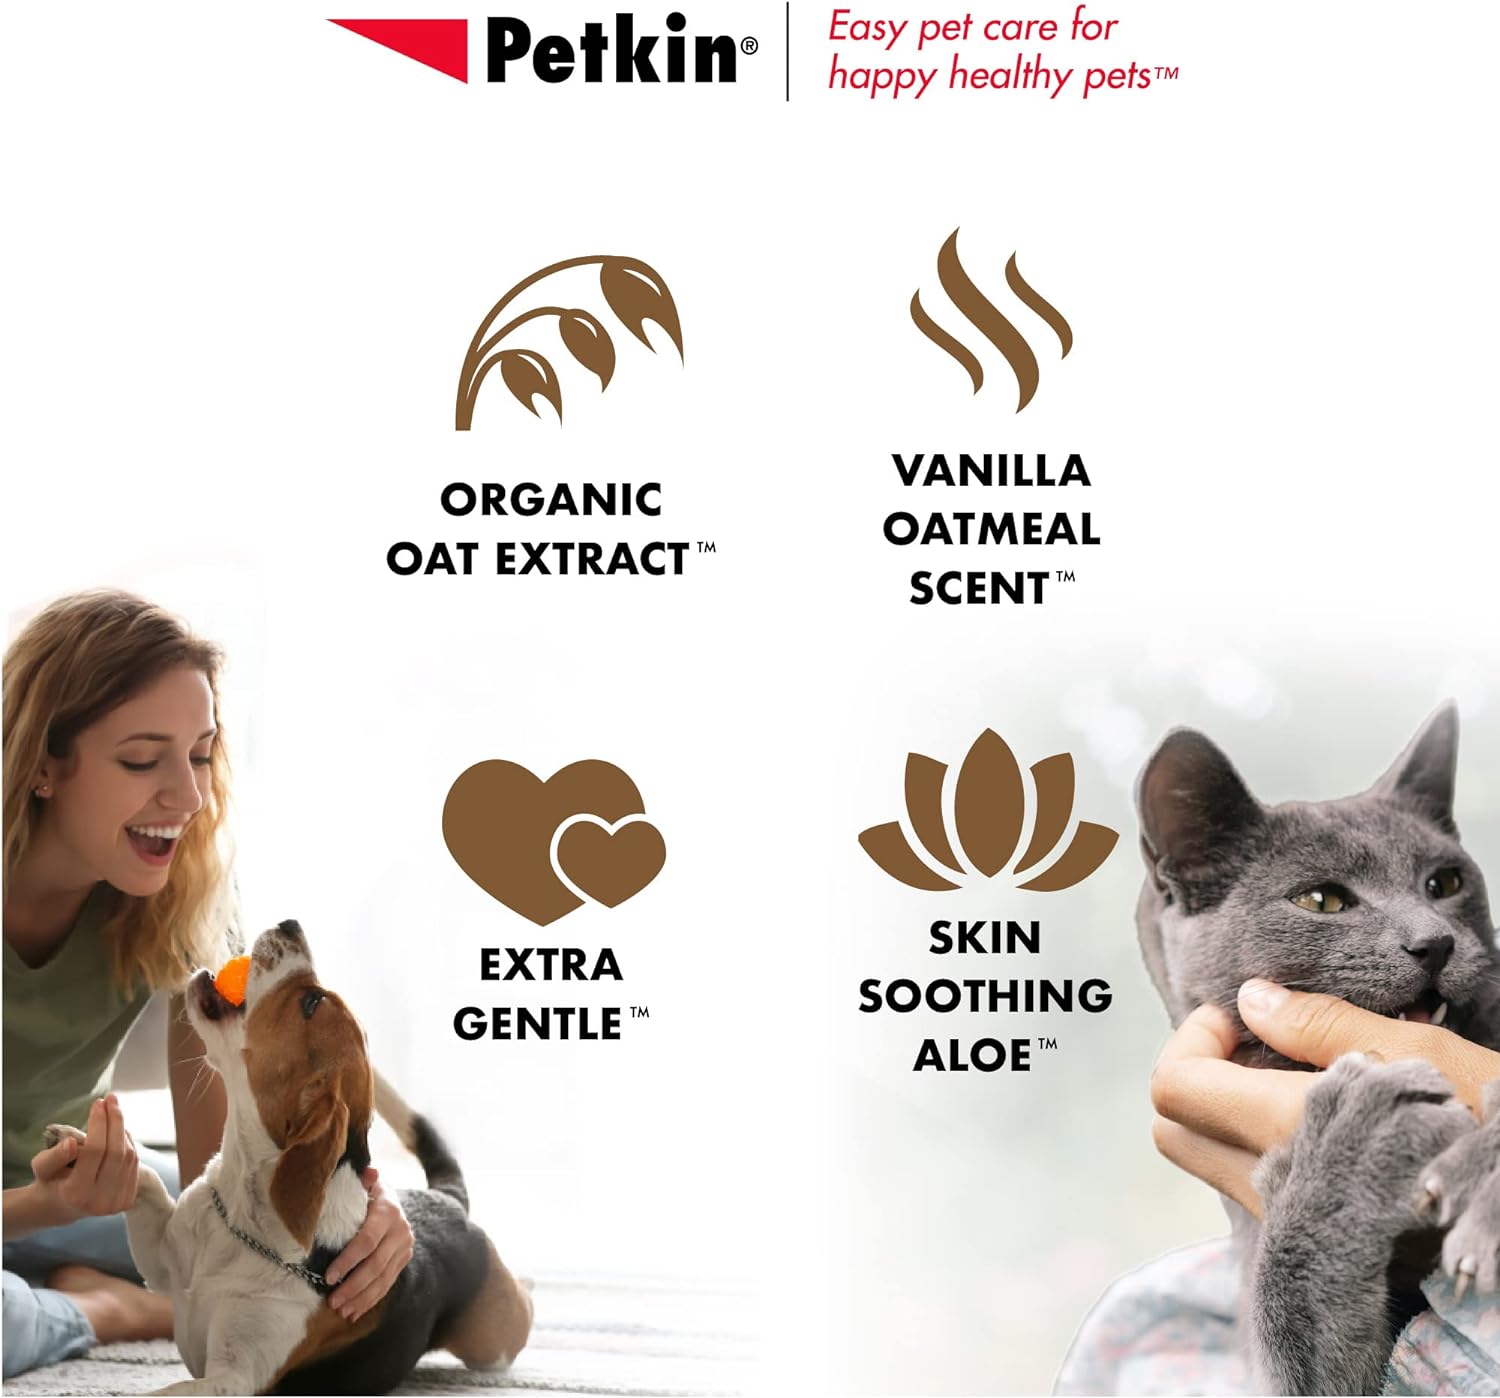 Petkin Pet Wipes for Dogs and Cats, 200 Wipes (Large) – Oatmeal Pet Wipes for Dogs and Cats – Soothes Itchy Dry Skin and Cleans Ears, Face, Butt, Body and Eye Area – 2 Packs of 100 Wipes : Pet Supplies